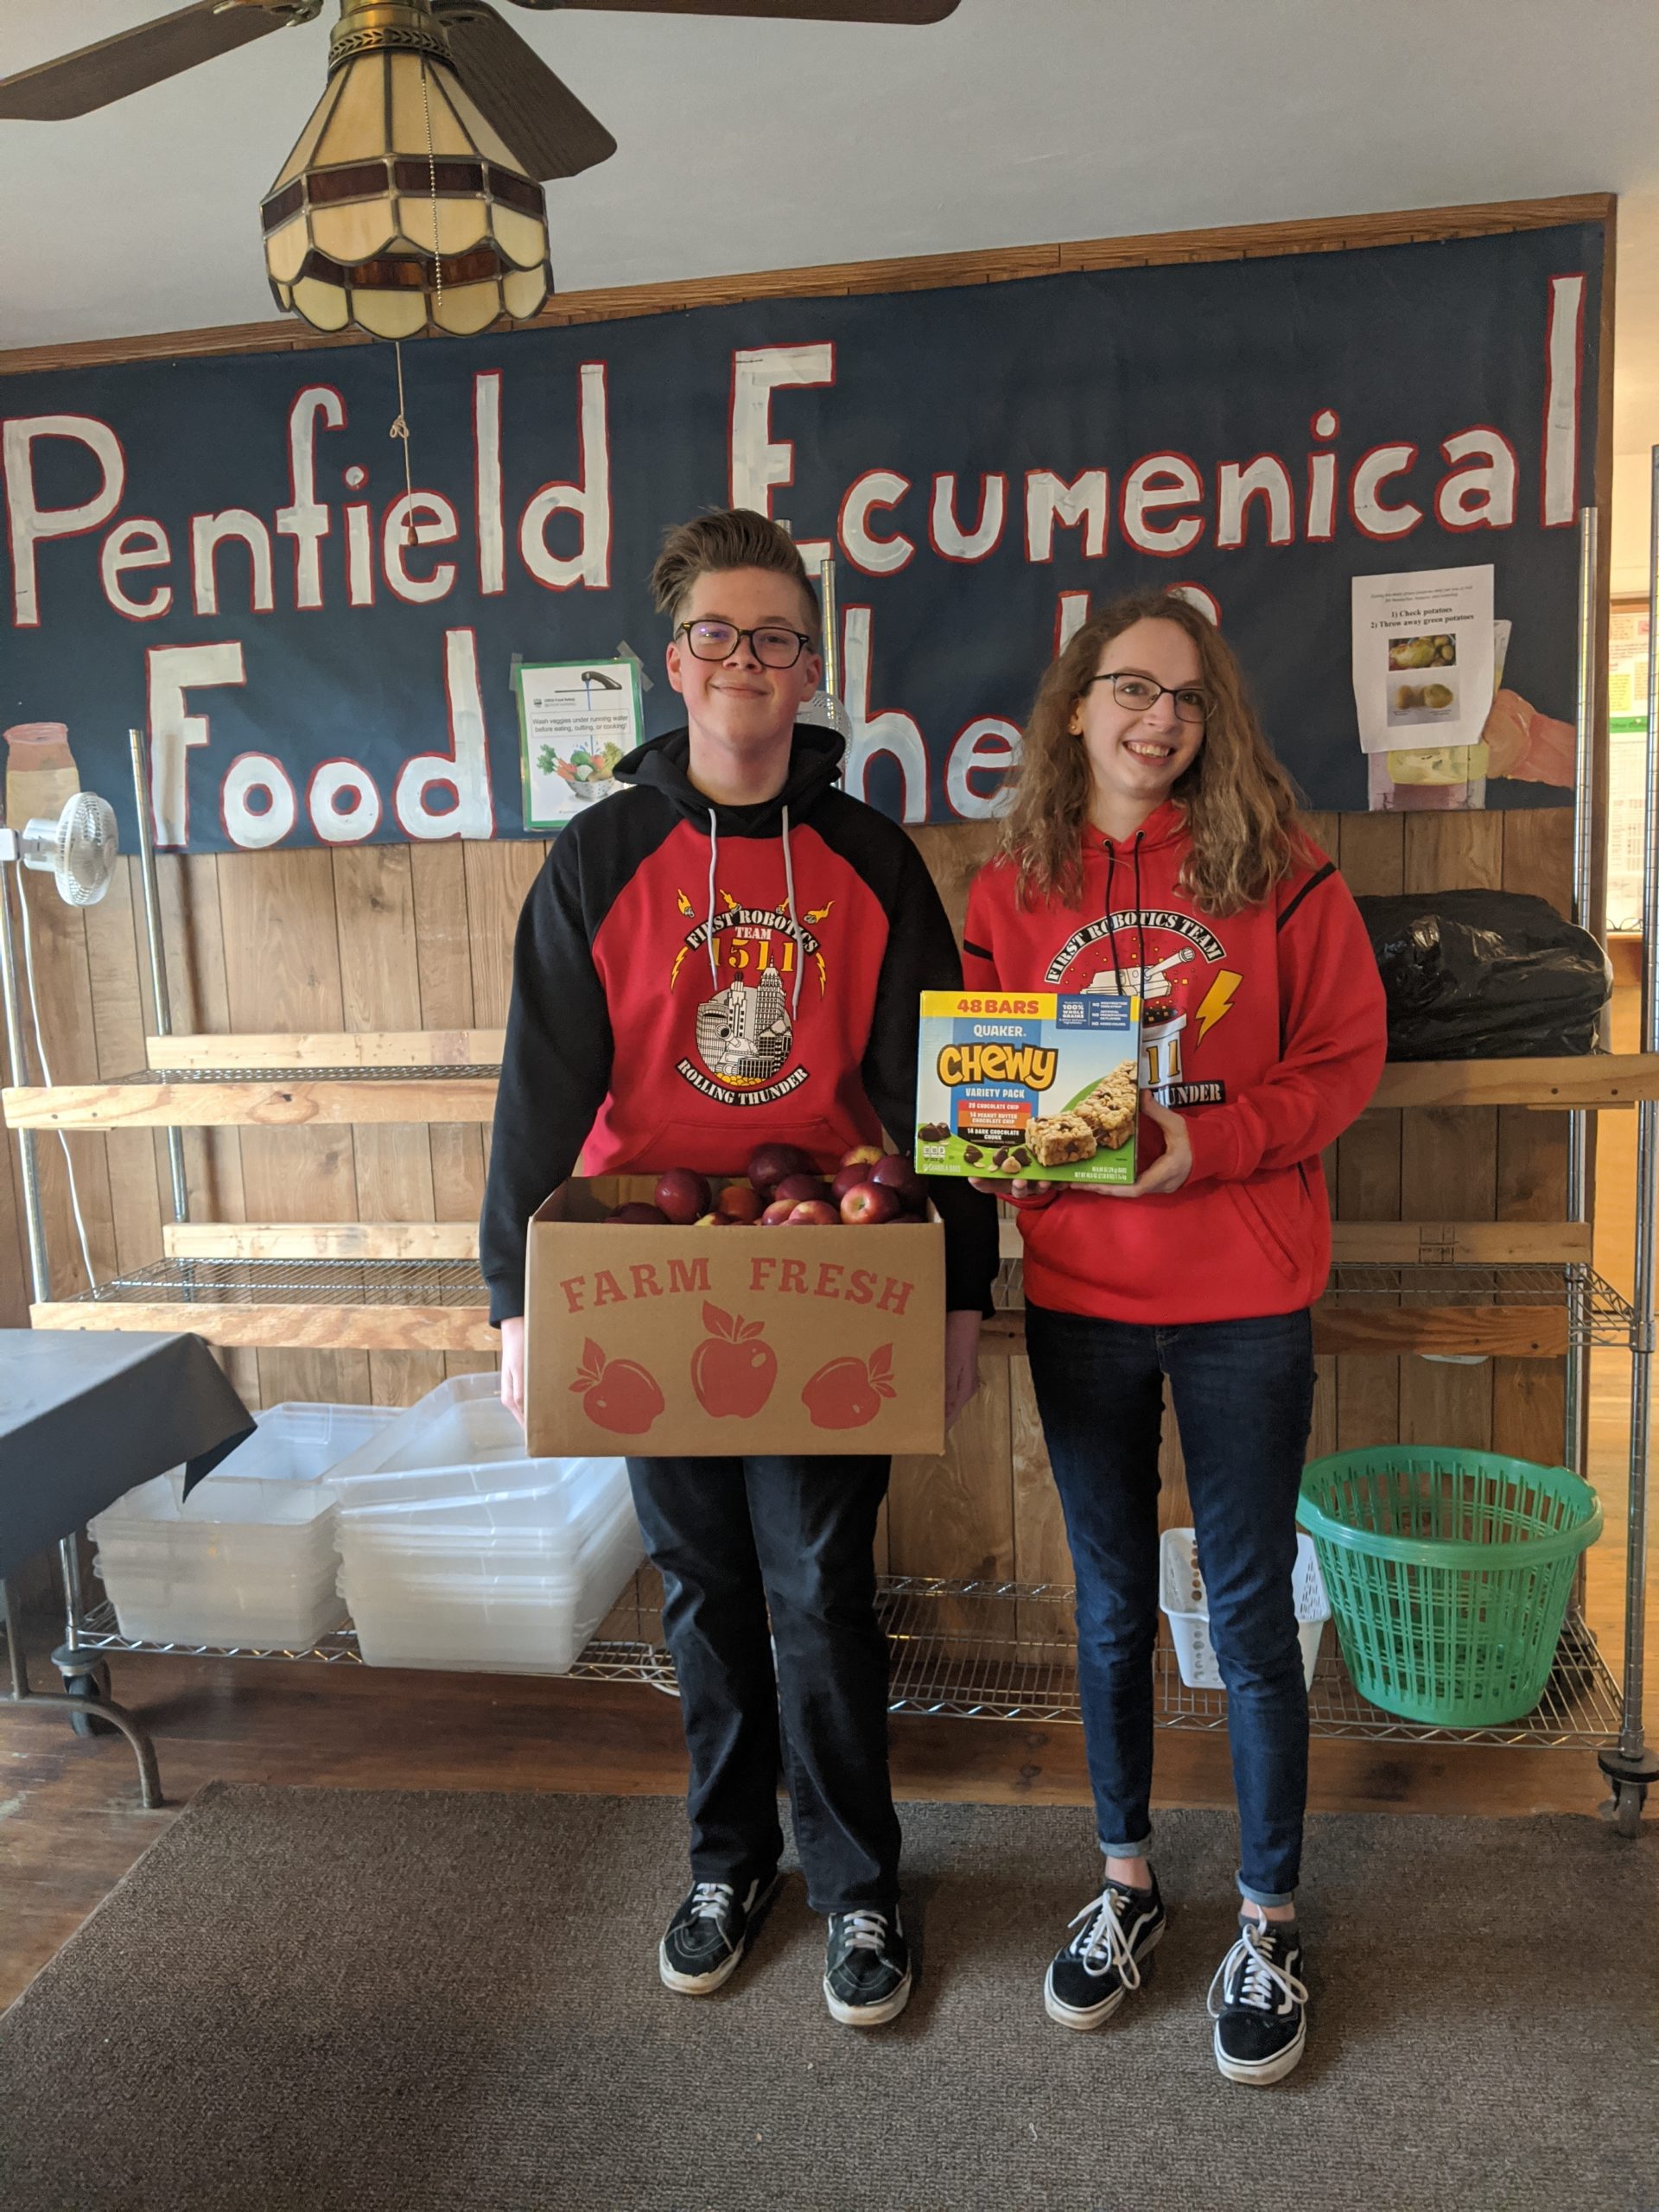 2 team members holding a box of apples and granola bars in front of Penfield Ecumenical Food Shelf sign